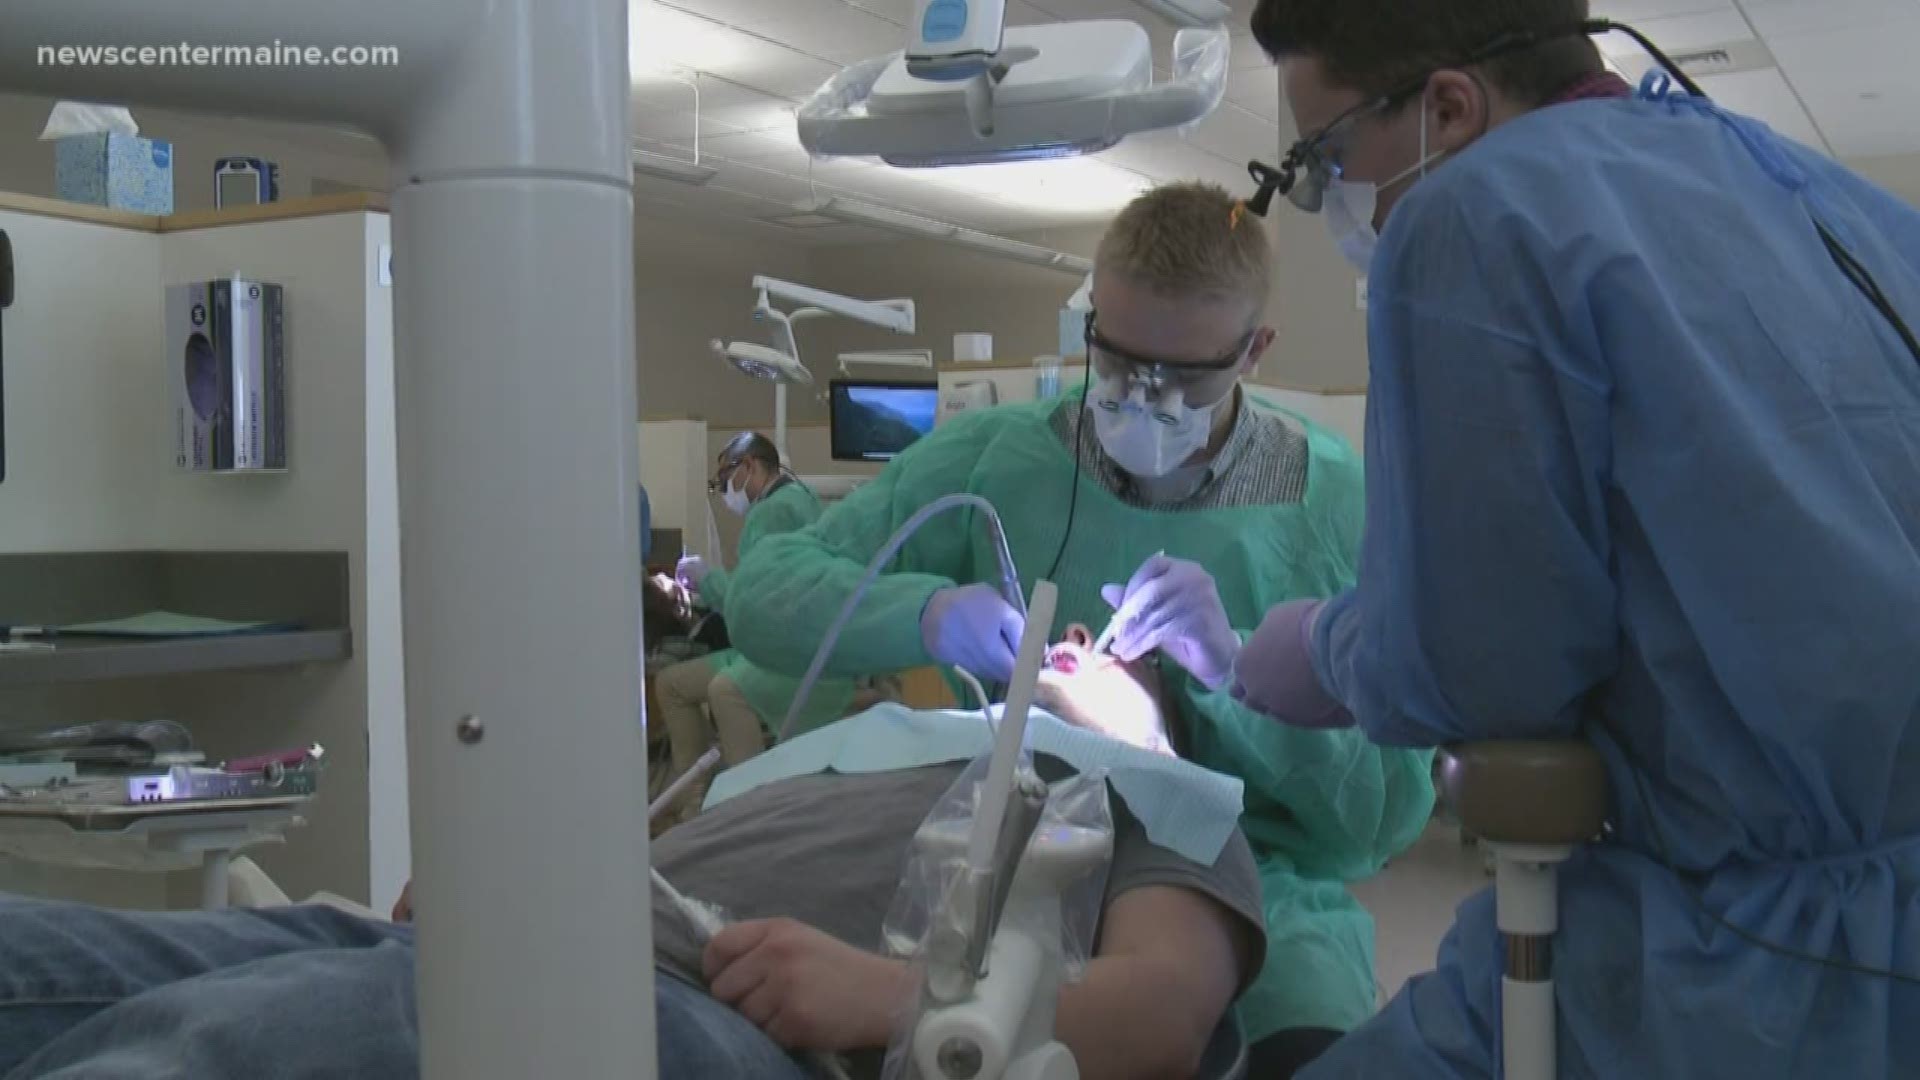 Each year University of New England students across the state spend one day volunteering their time and skills providing free dental care to anyone who needs it.